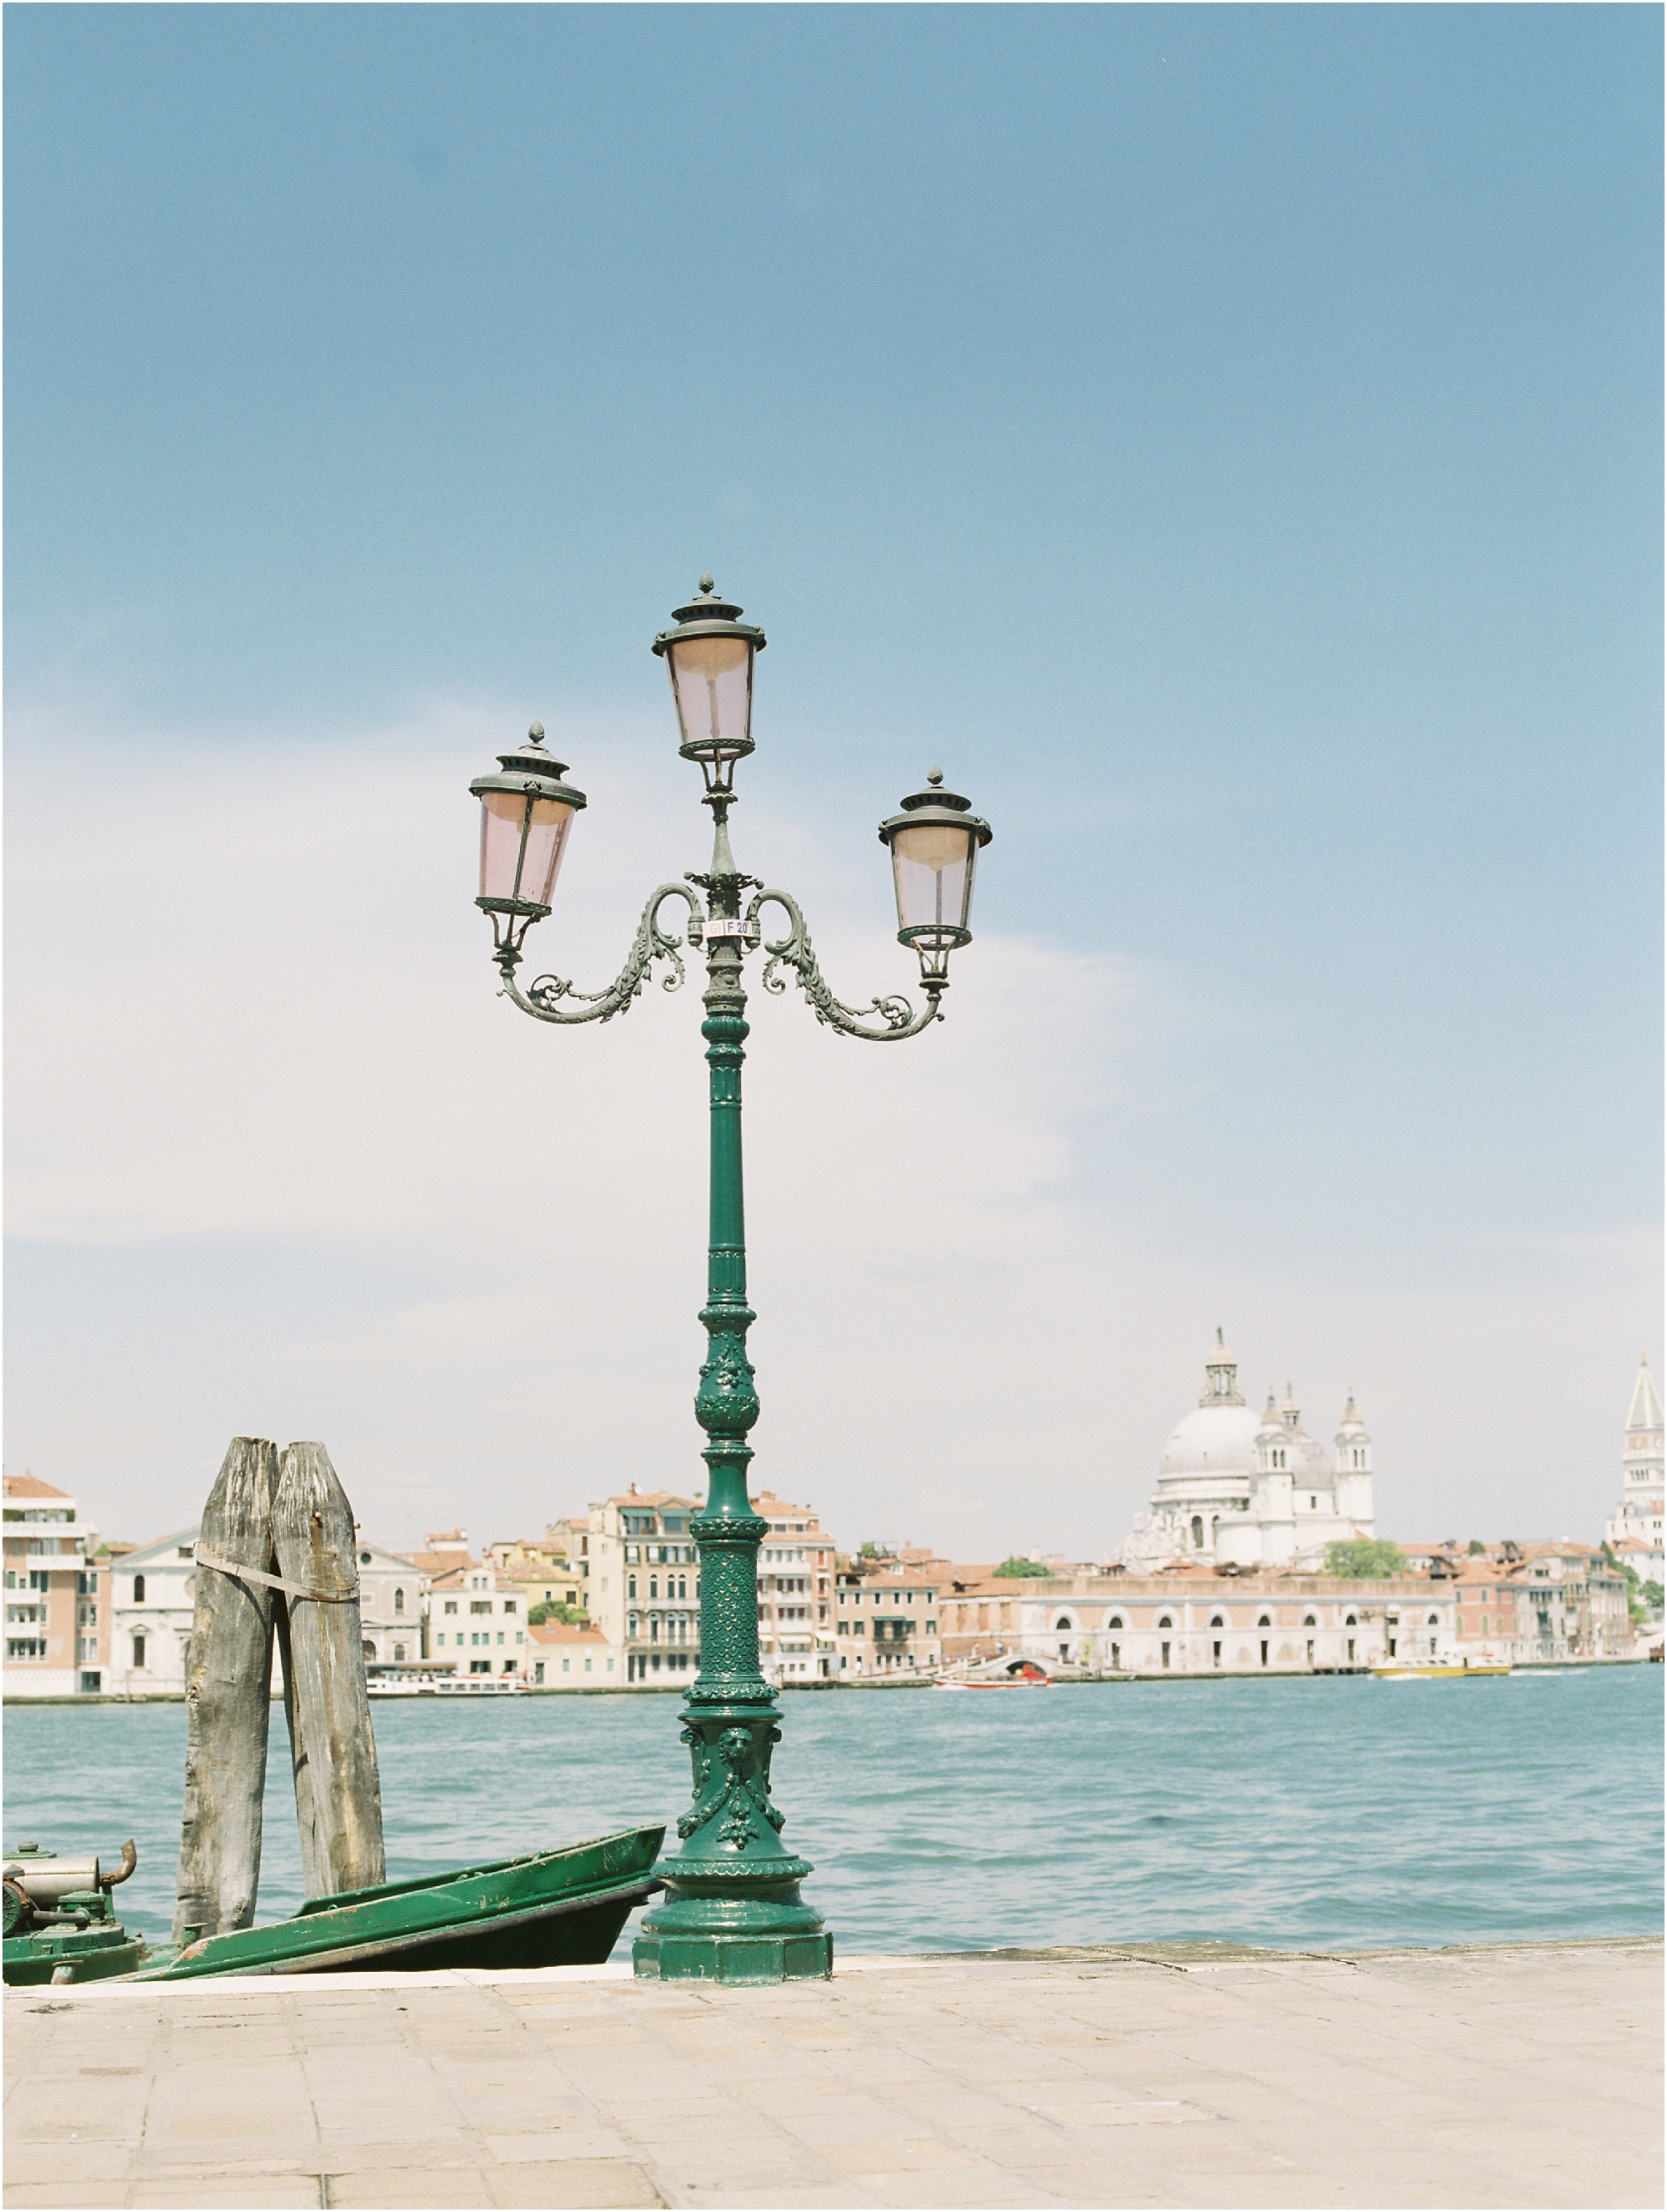 Lamp post with Venice in the background